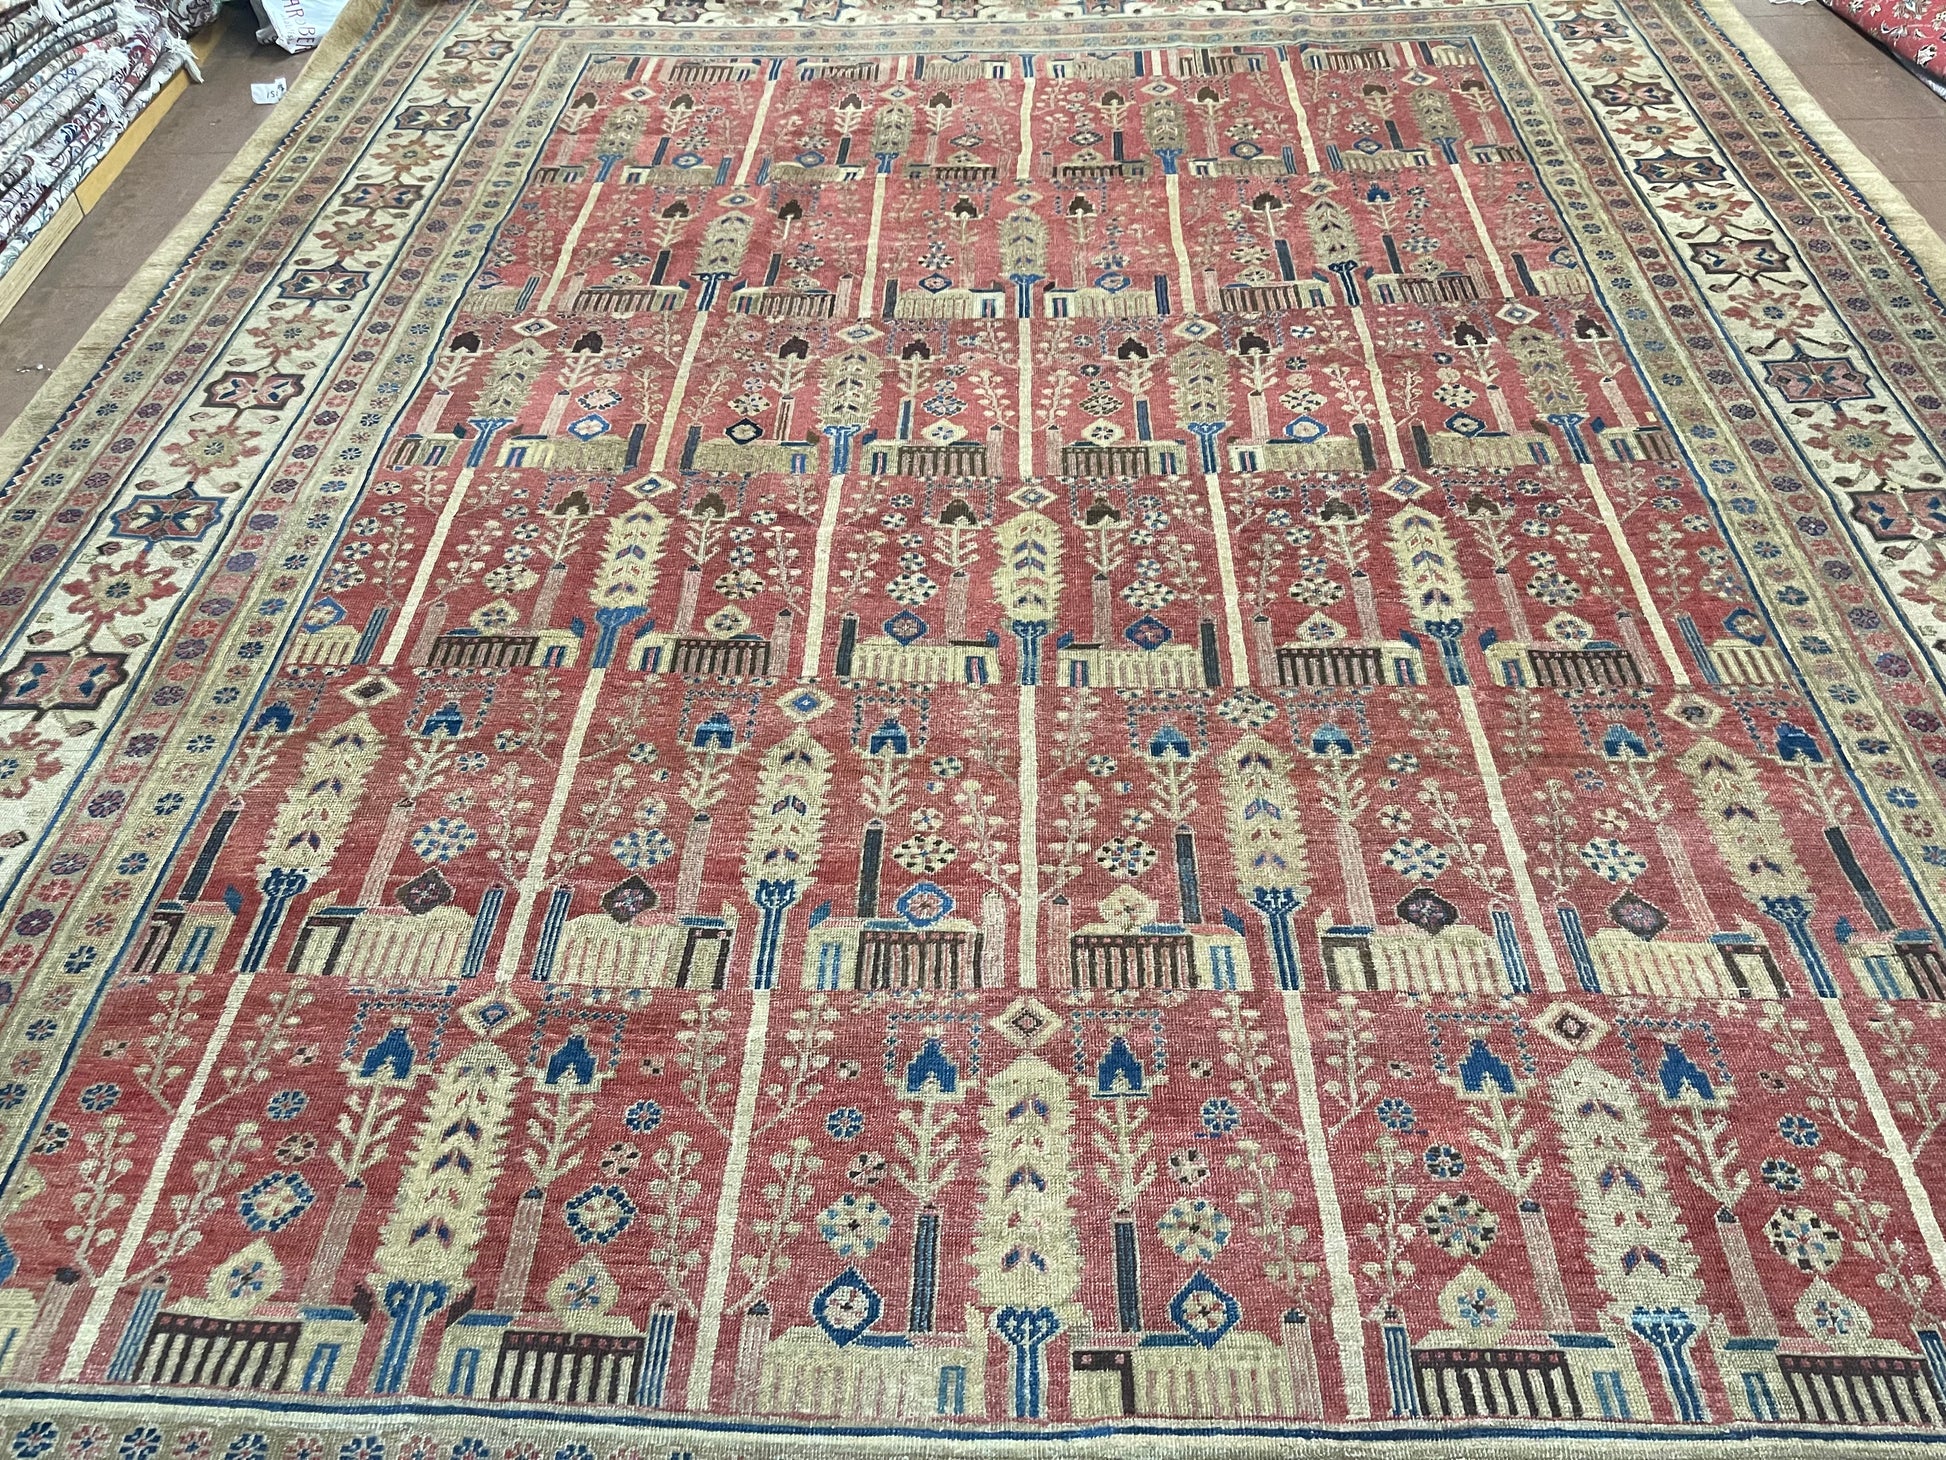 Front view of the palace-sized rug highlighting its harmonious blend of colors